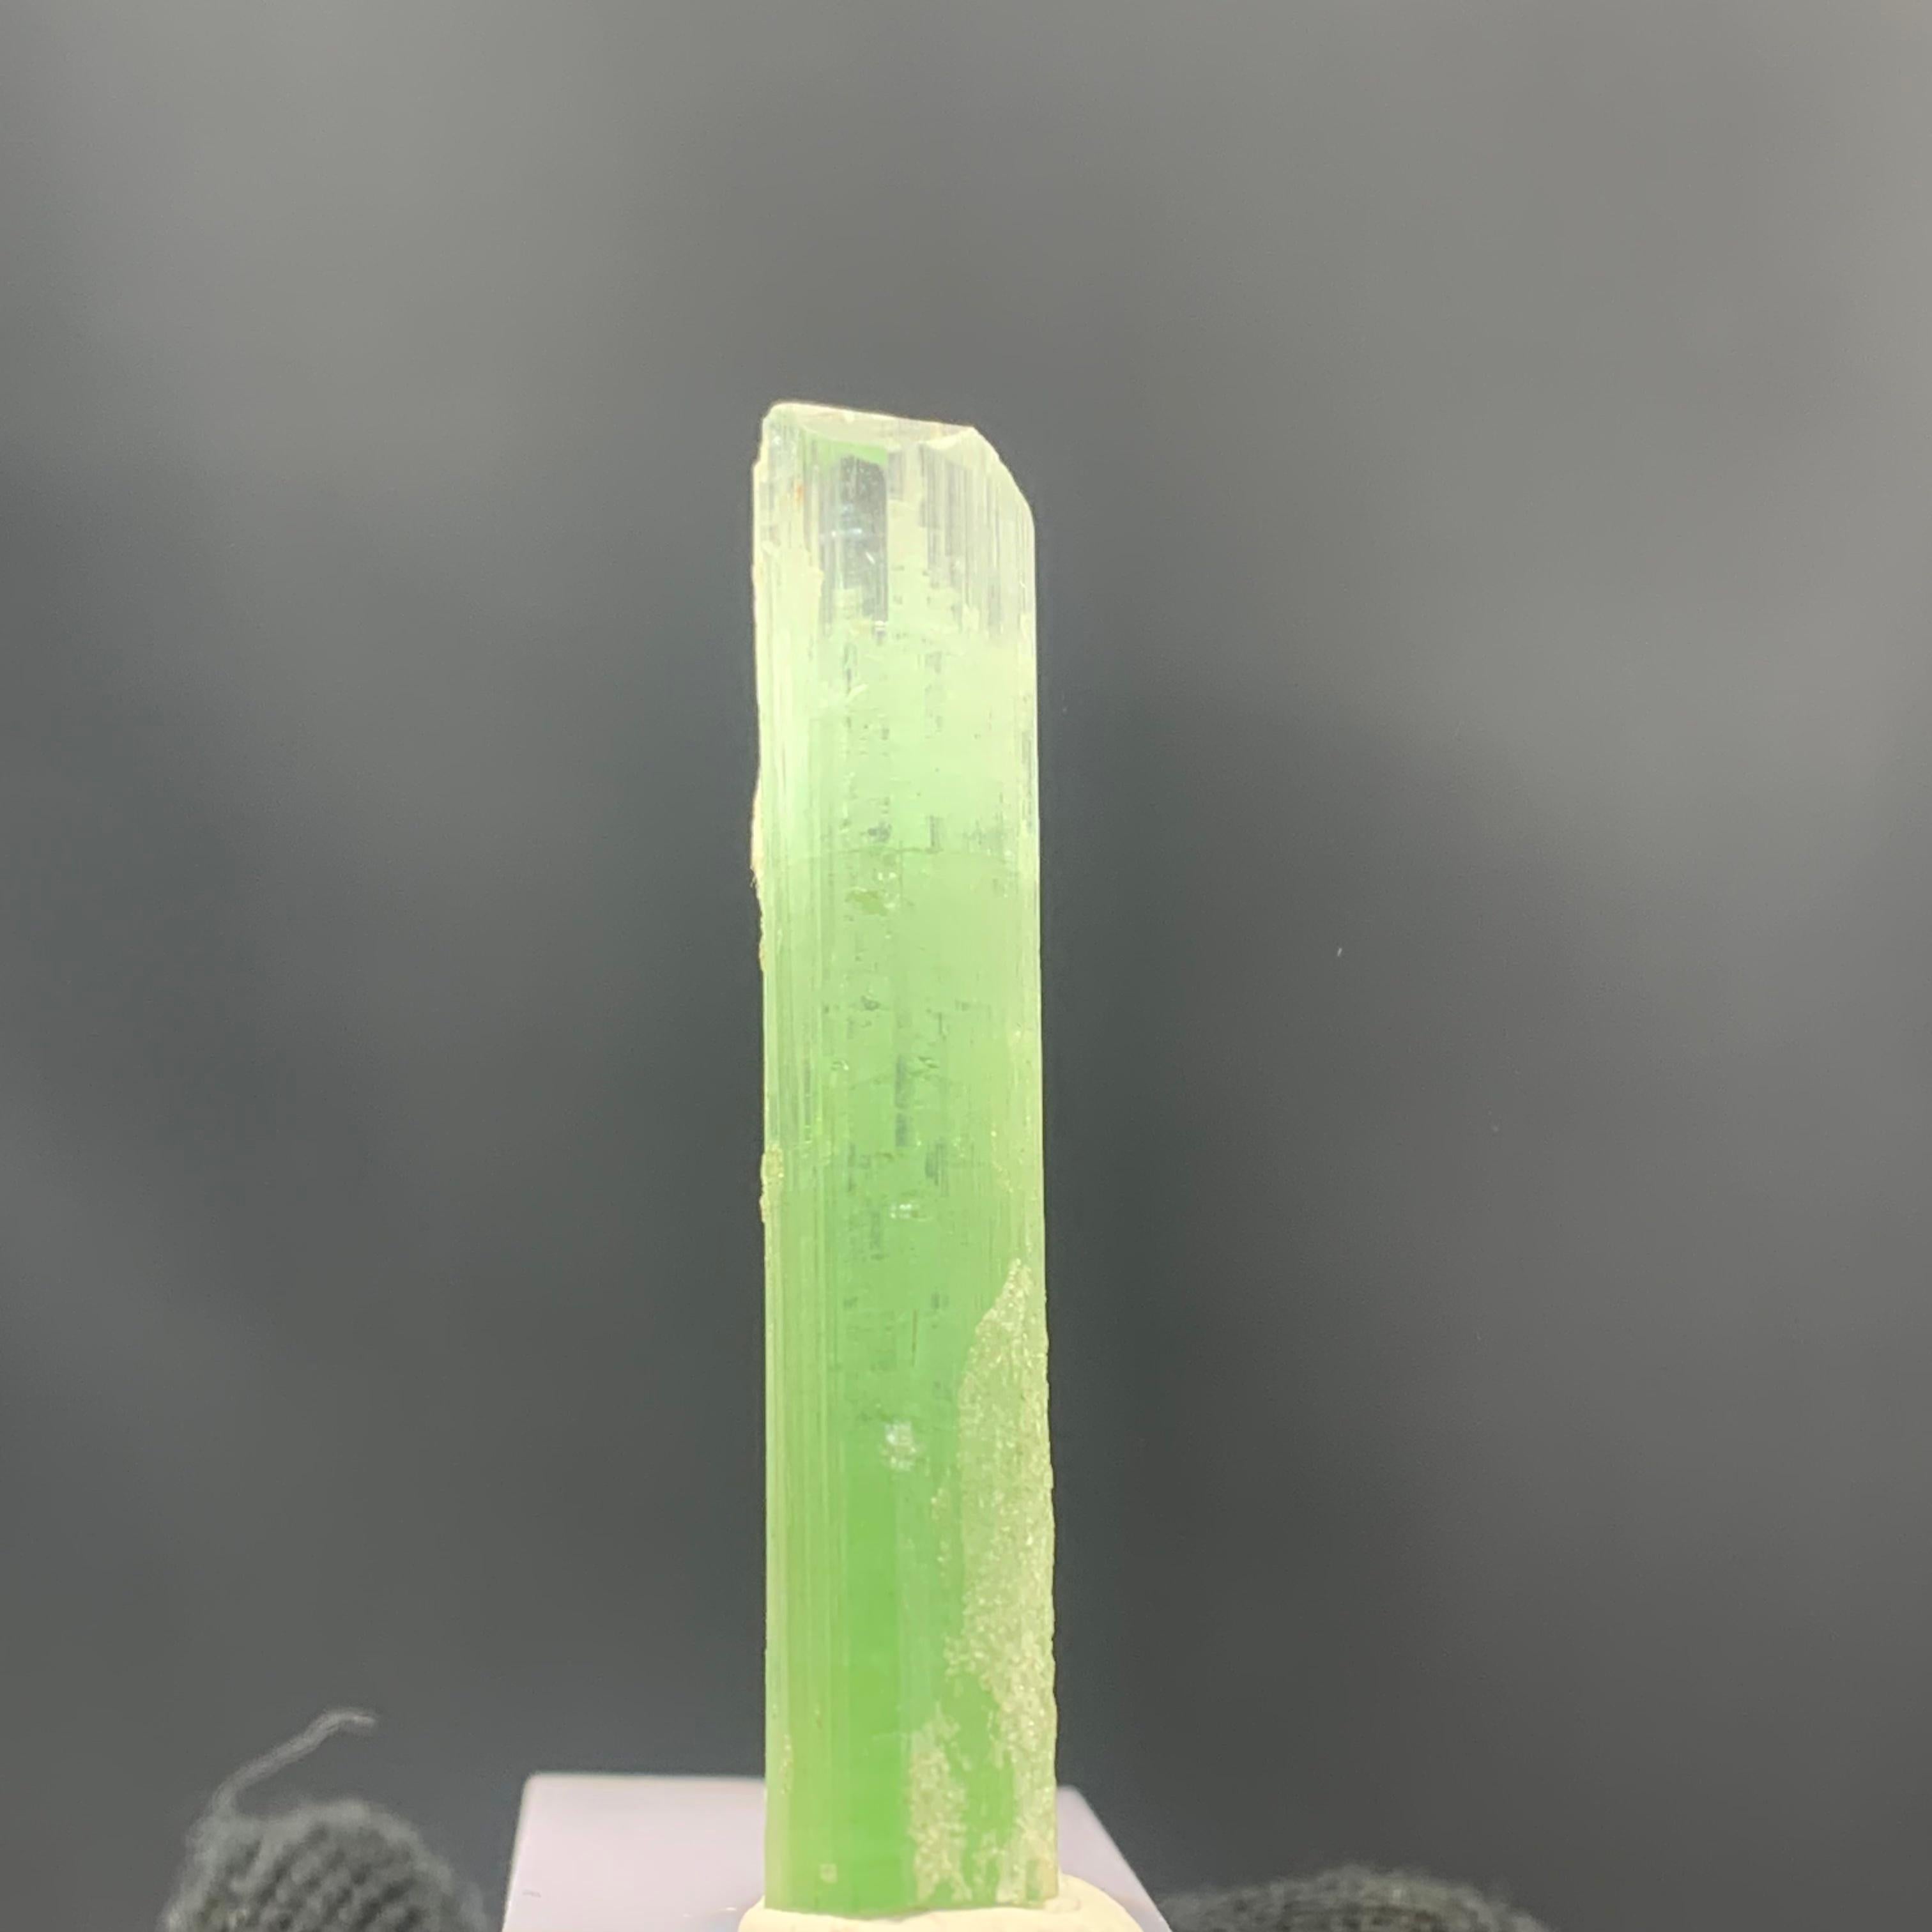 Beautiful Bi Color Tourmaline Crystal From From Kunar Afghanistan 

Weight: 21.20 Cts 
Dim: 4.2 x 0.8 x 0.6 Cm
Origin: Kunar, Afghanistan 

Tourmaline is a crystalline silicate mineral group in which boron is compounded with elements such as